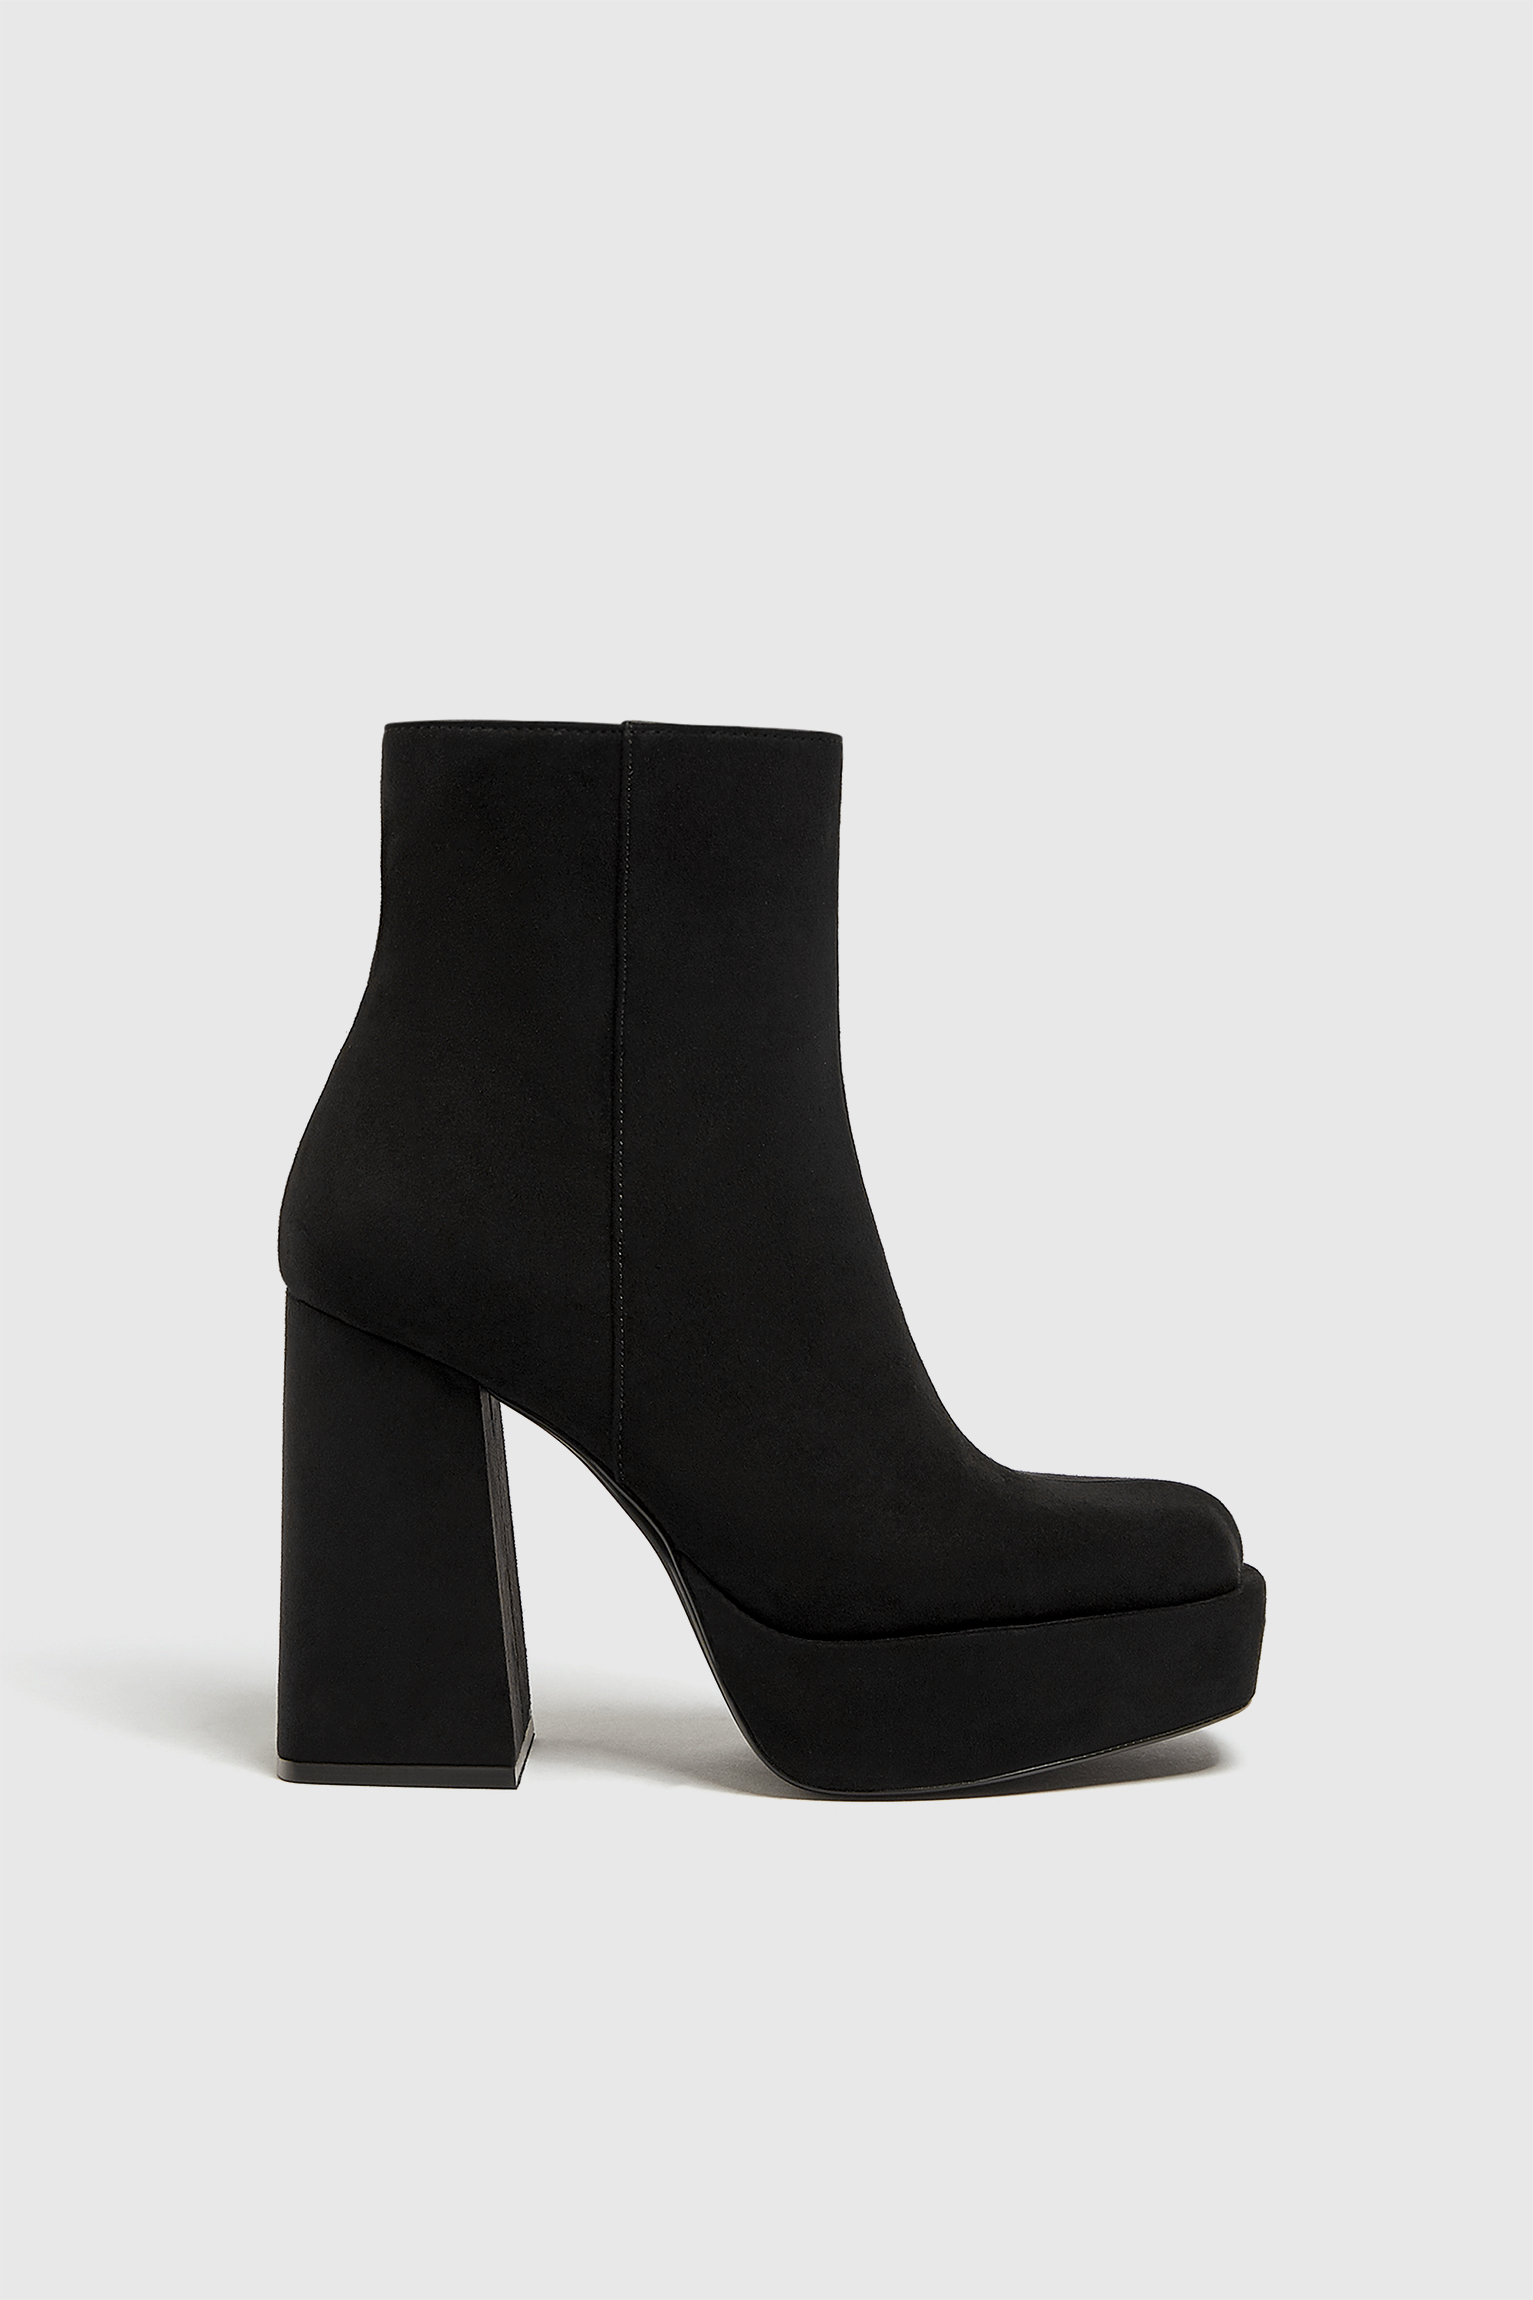 NICOLETTE Black Leather Pointed Toe Ankle Bootie | Women's Booties – Steve  Madden